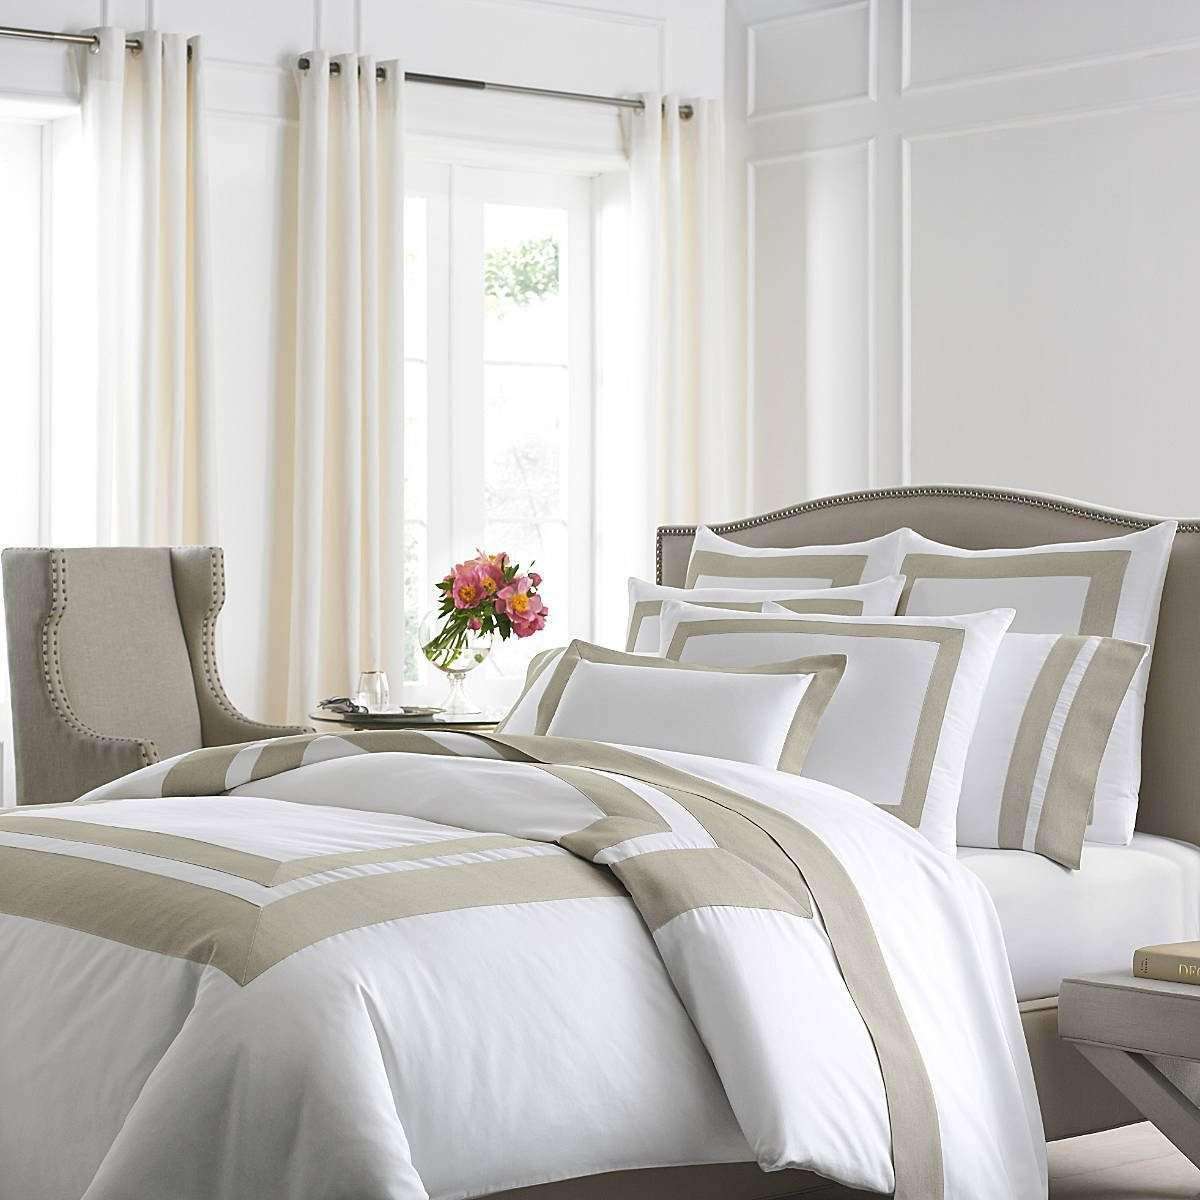 Luxor Linens Pillow Cases  Shop Luxury Bedding and Bath at Luxor Linens